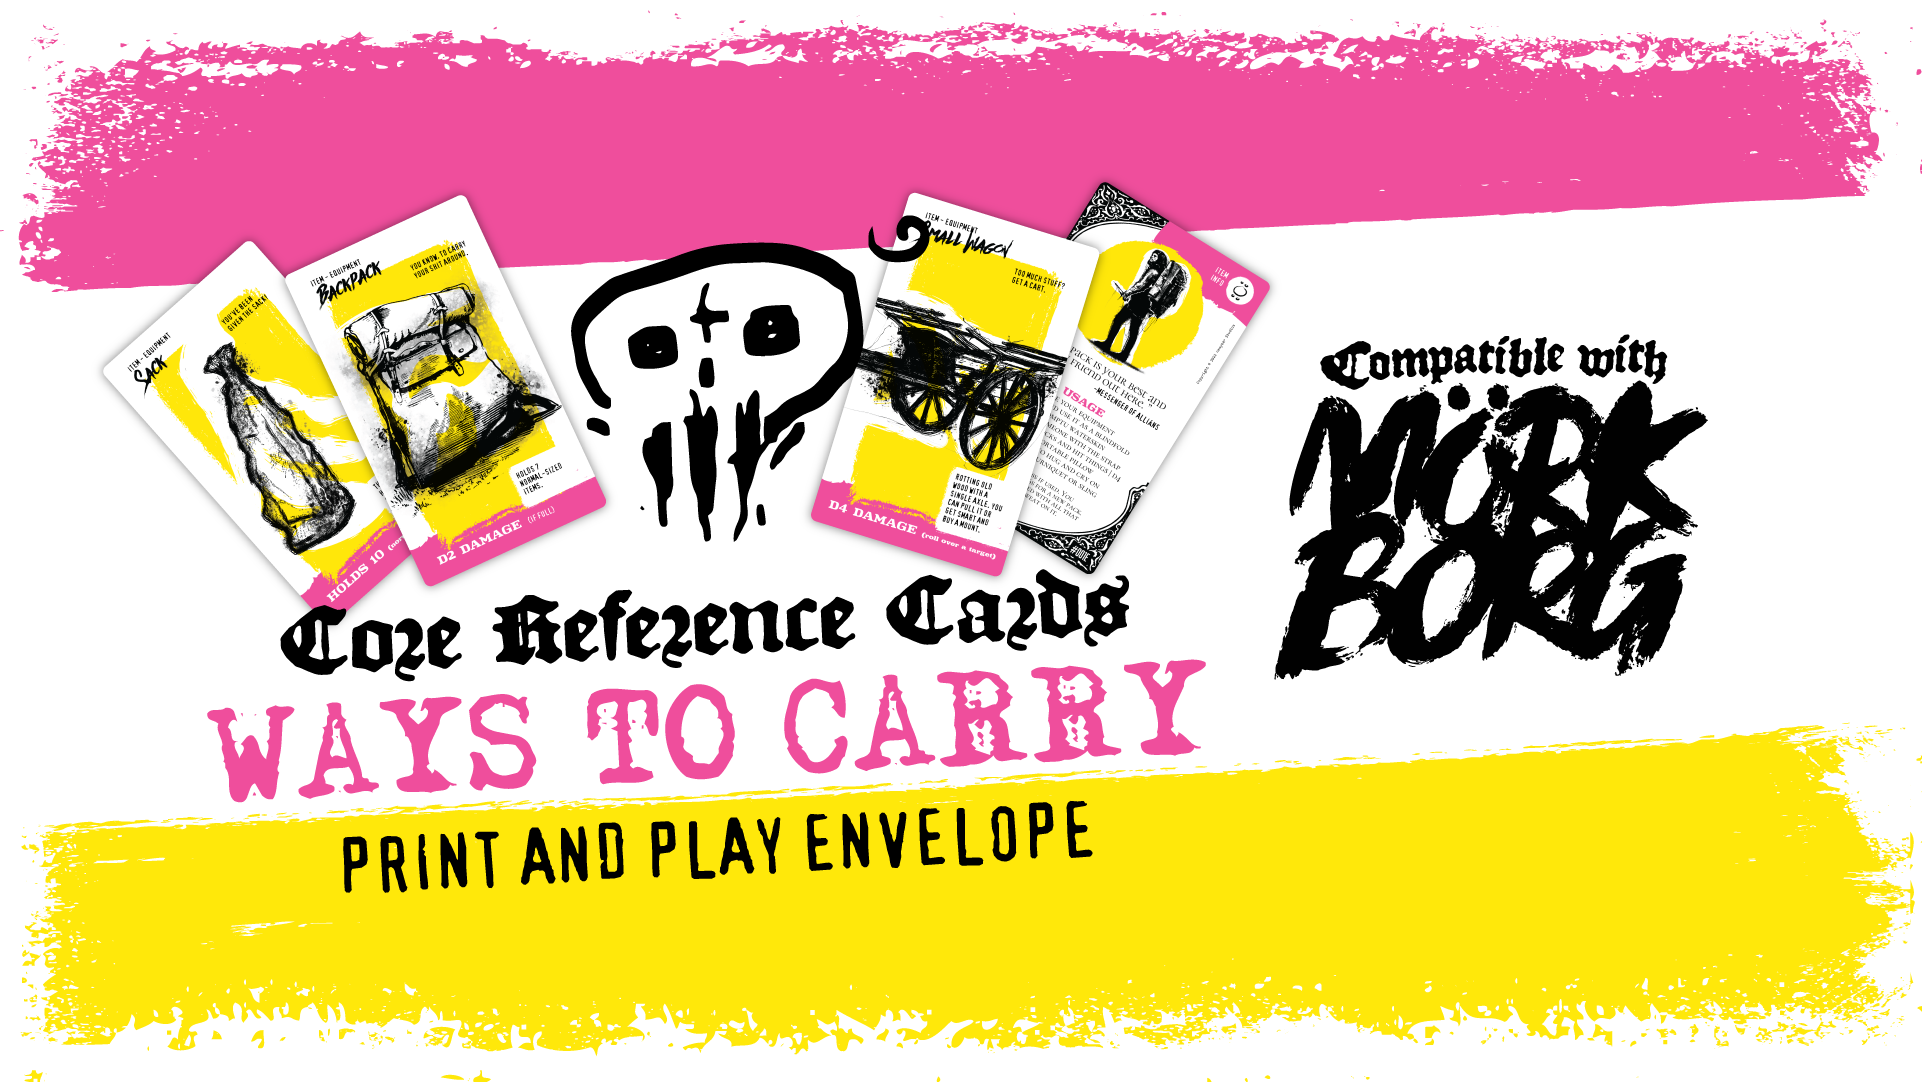 Ways To Carry - Print and Play Envelope